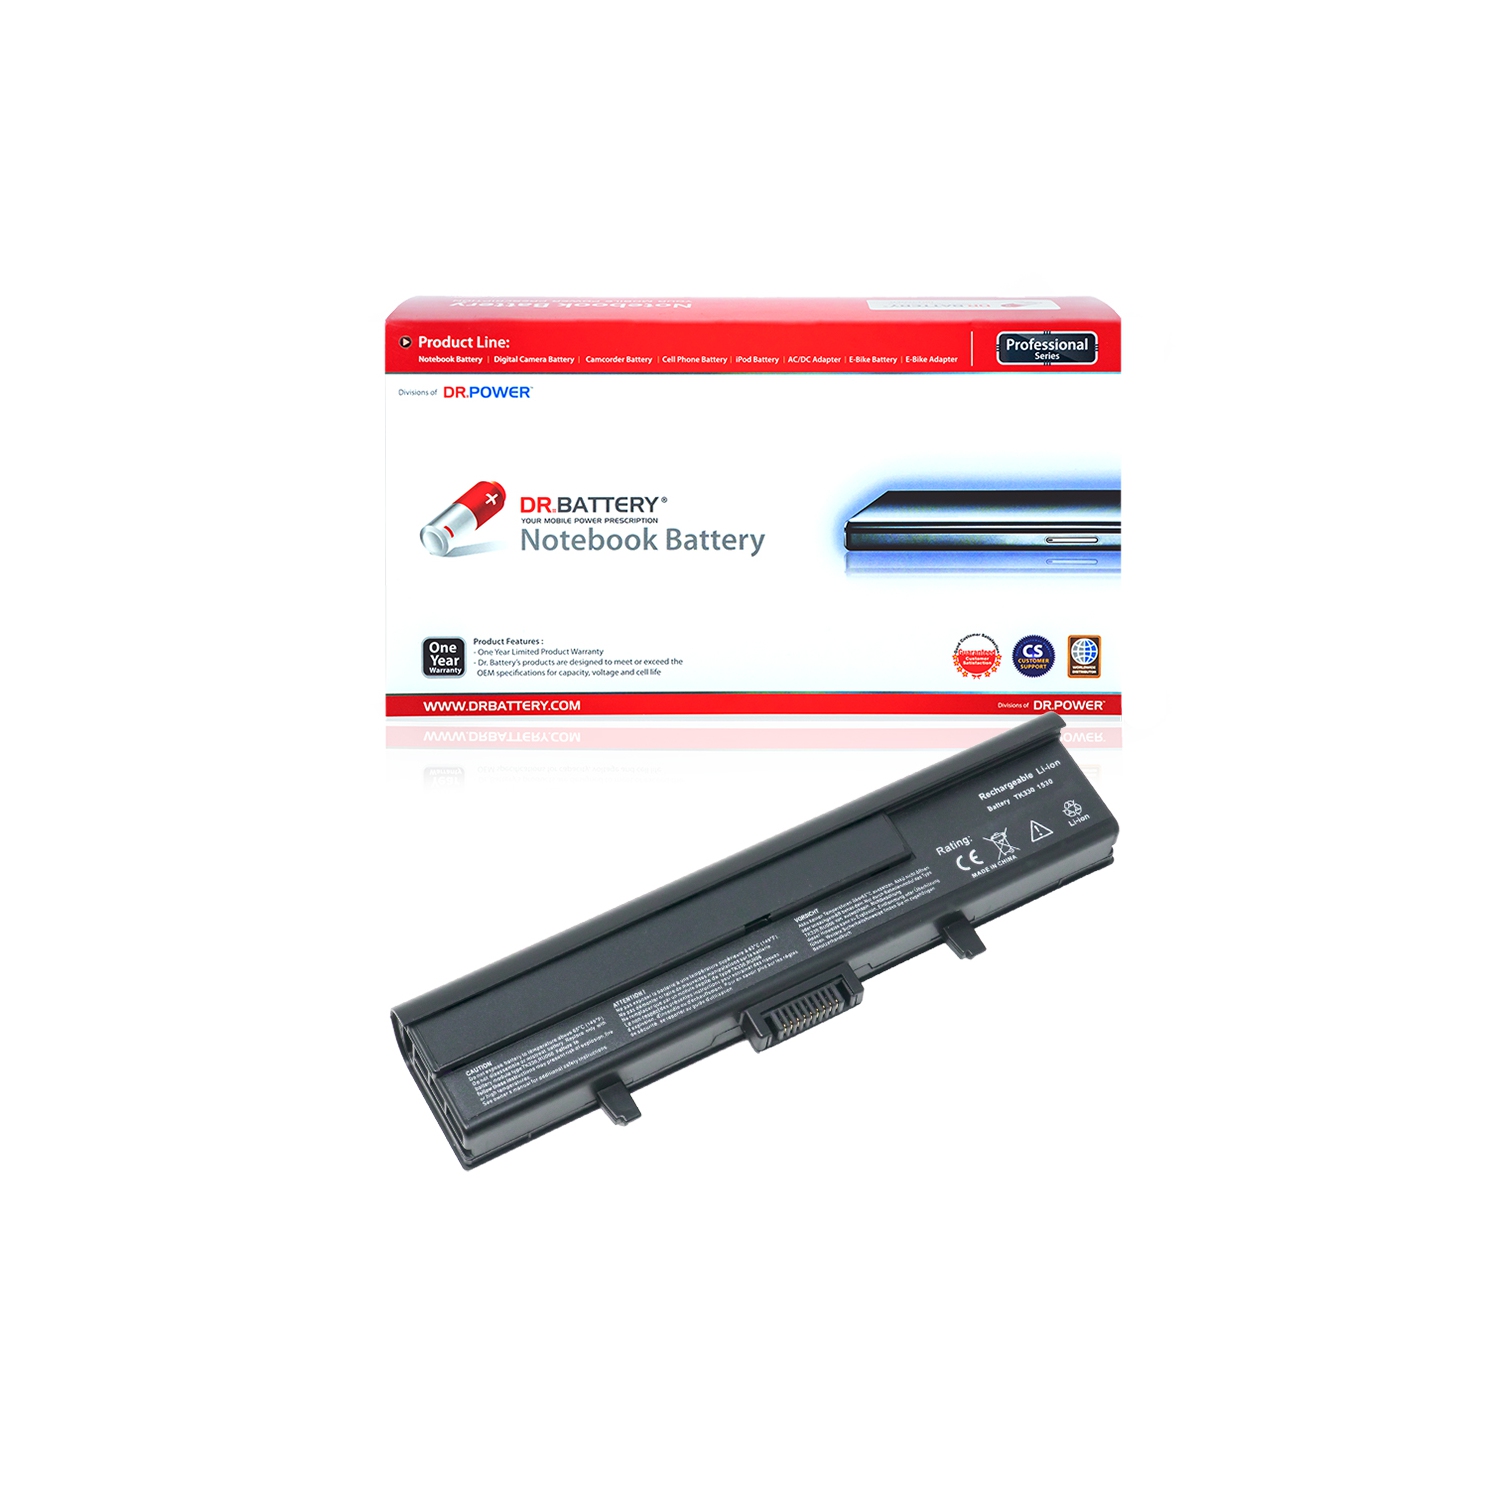 DR. BATTERY - Replacement for Dell Inspiron XPS M1530 / 0RU028 / 0RU033 / 12-00622 / 312-0622 / 312-0660 / 312-0662